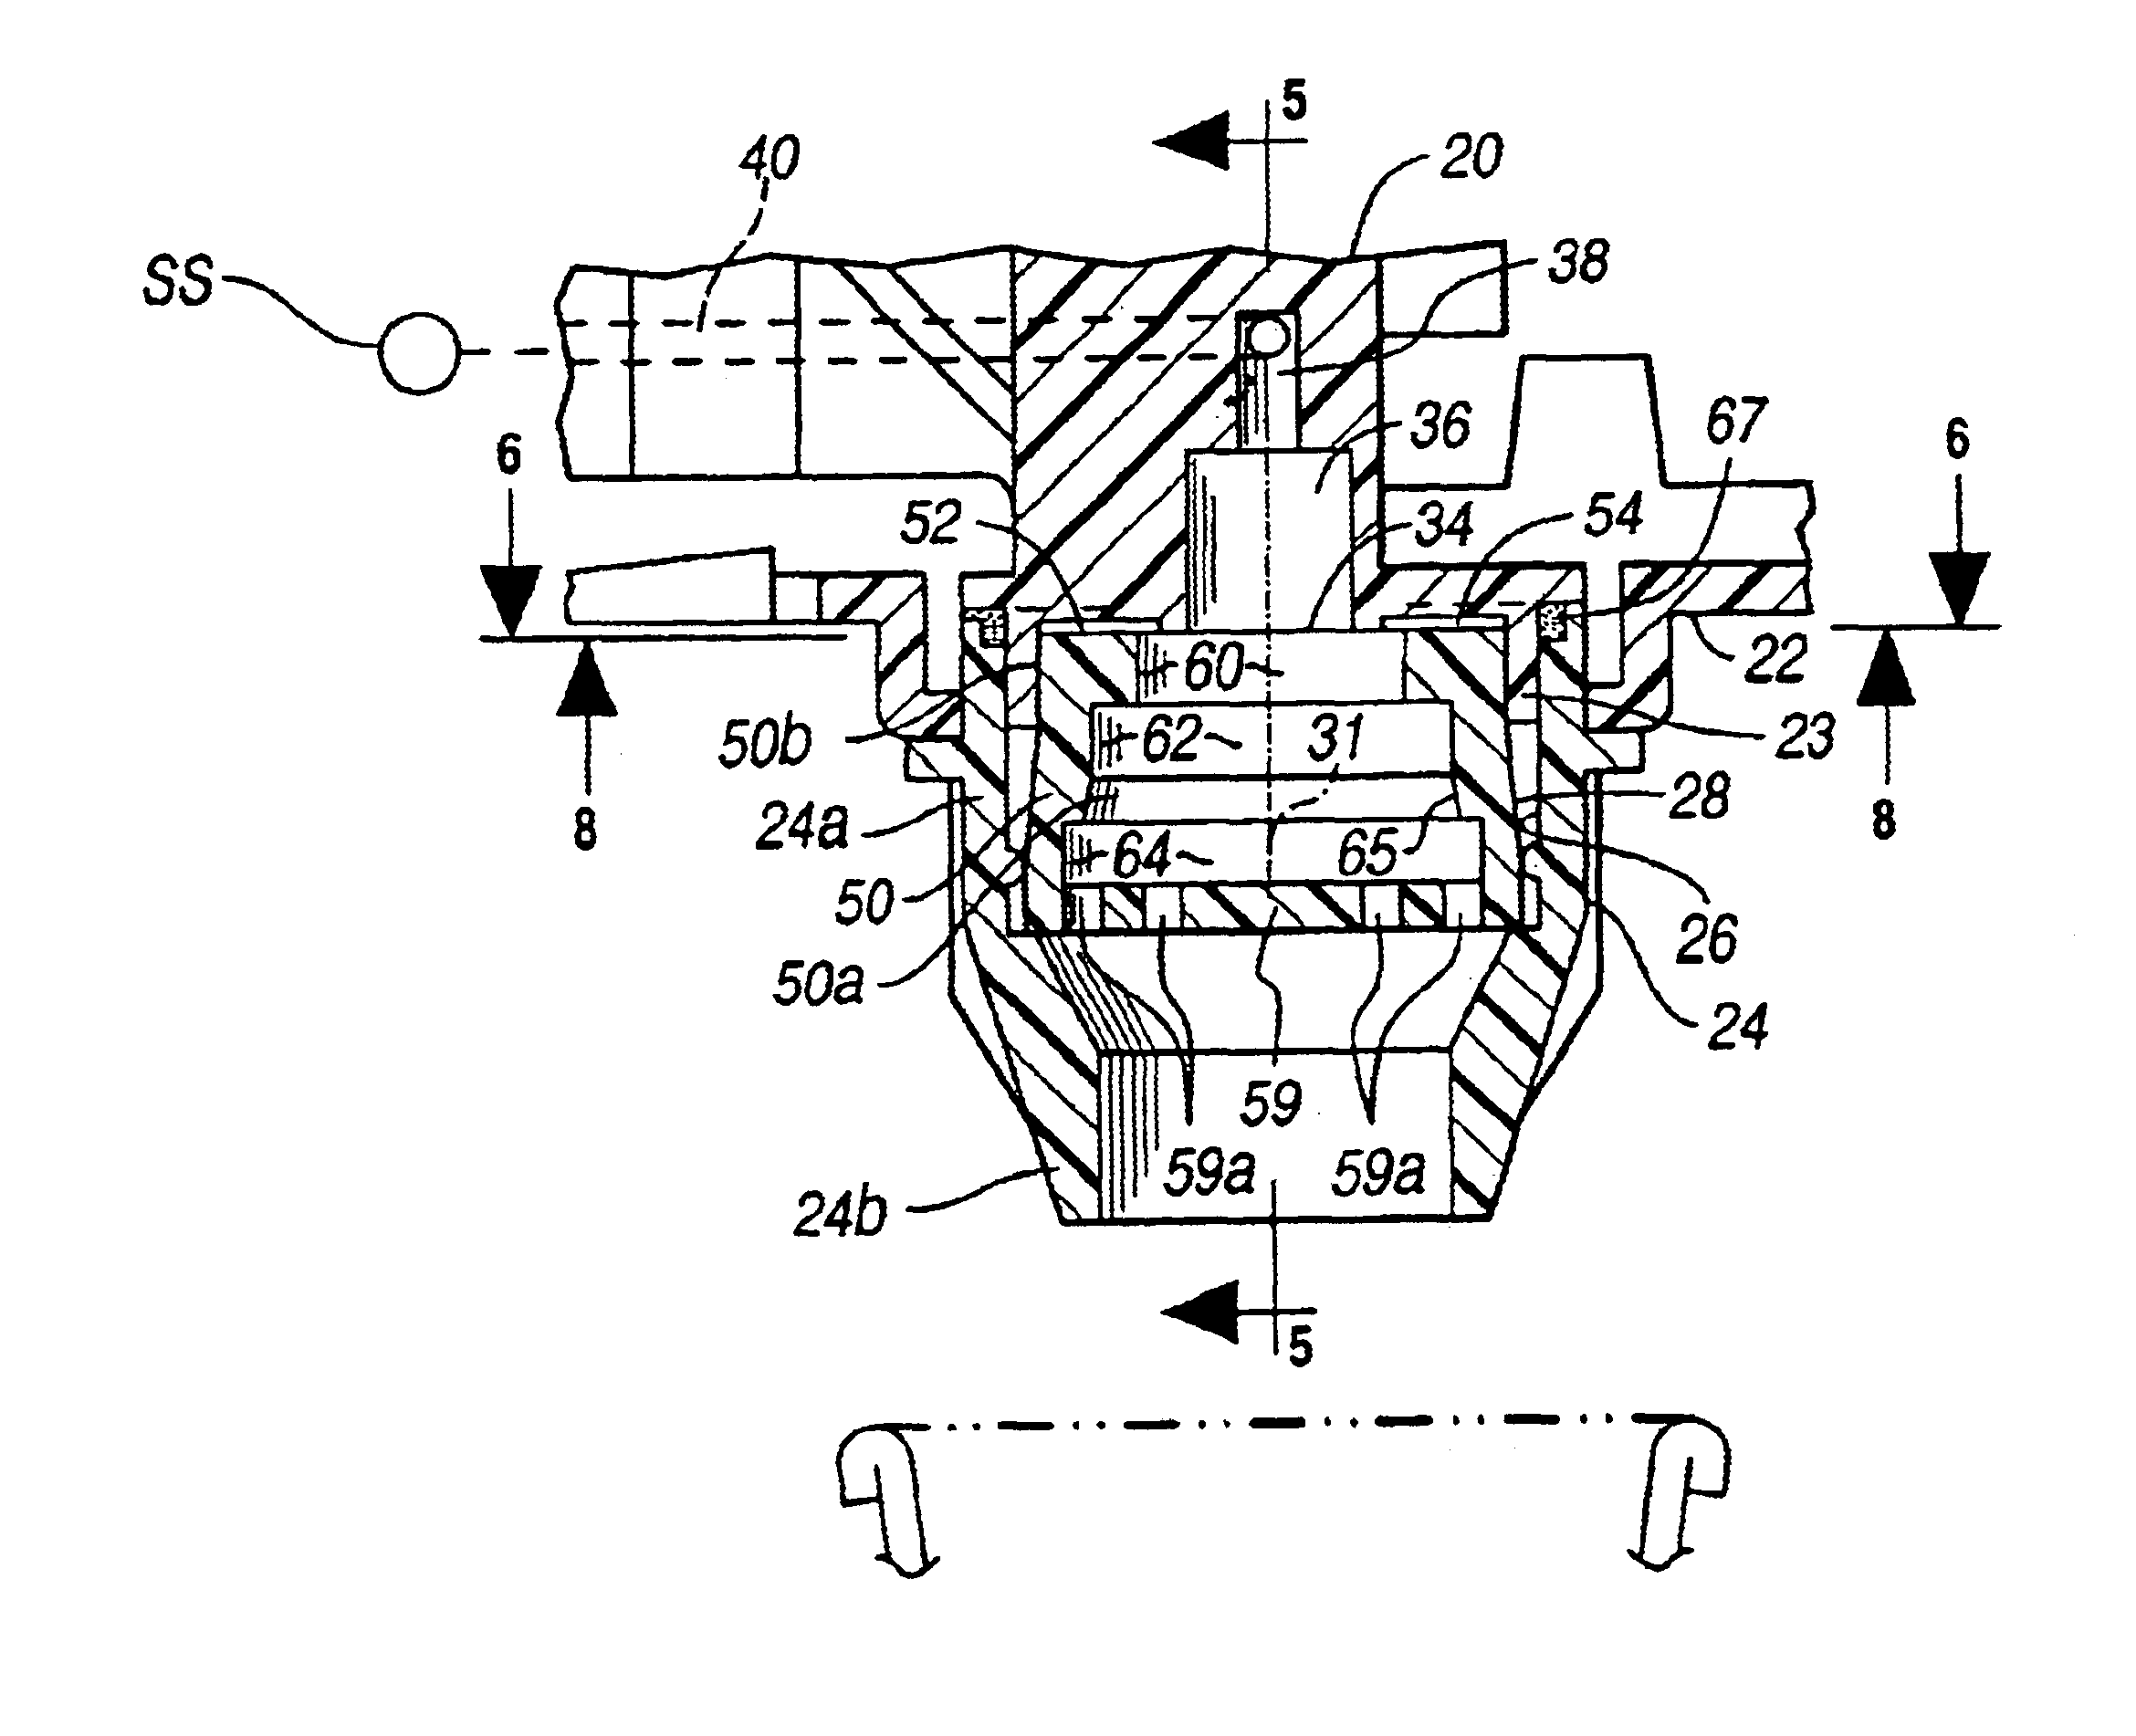 Beverage dispensing apparatus including a whipper insert and method